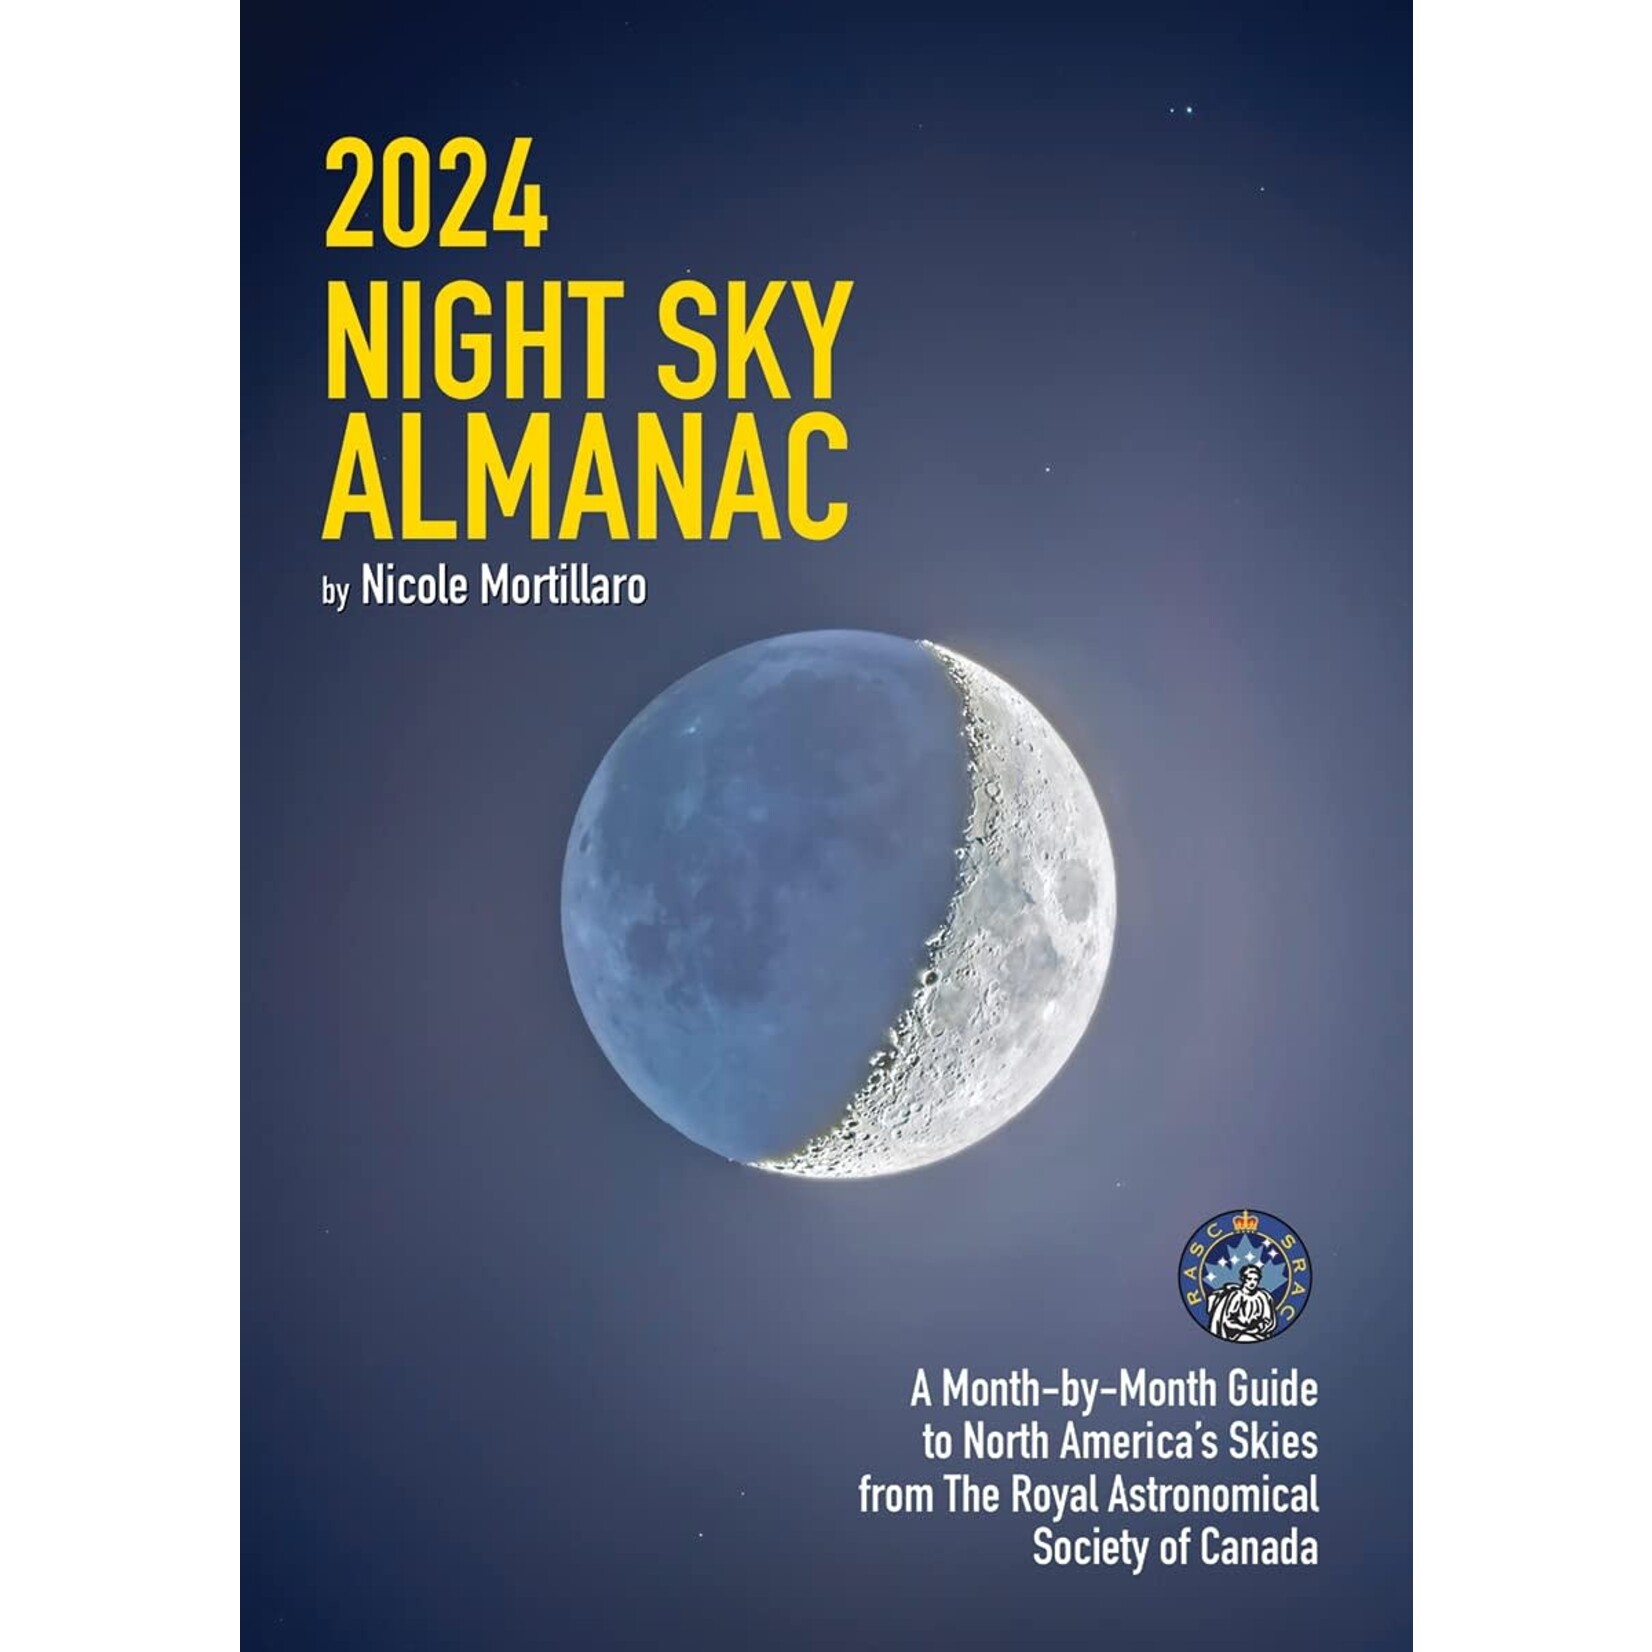 2024 Night Sky Almanac: A Month-by-Month Guide to North America's Skies from the Royal Astronomical Society of Canada